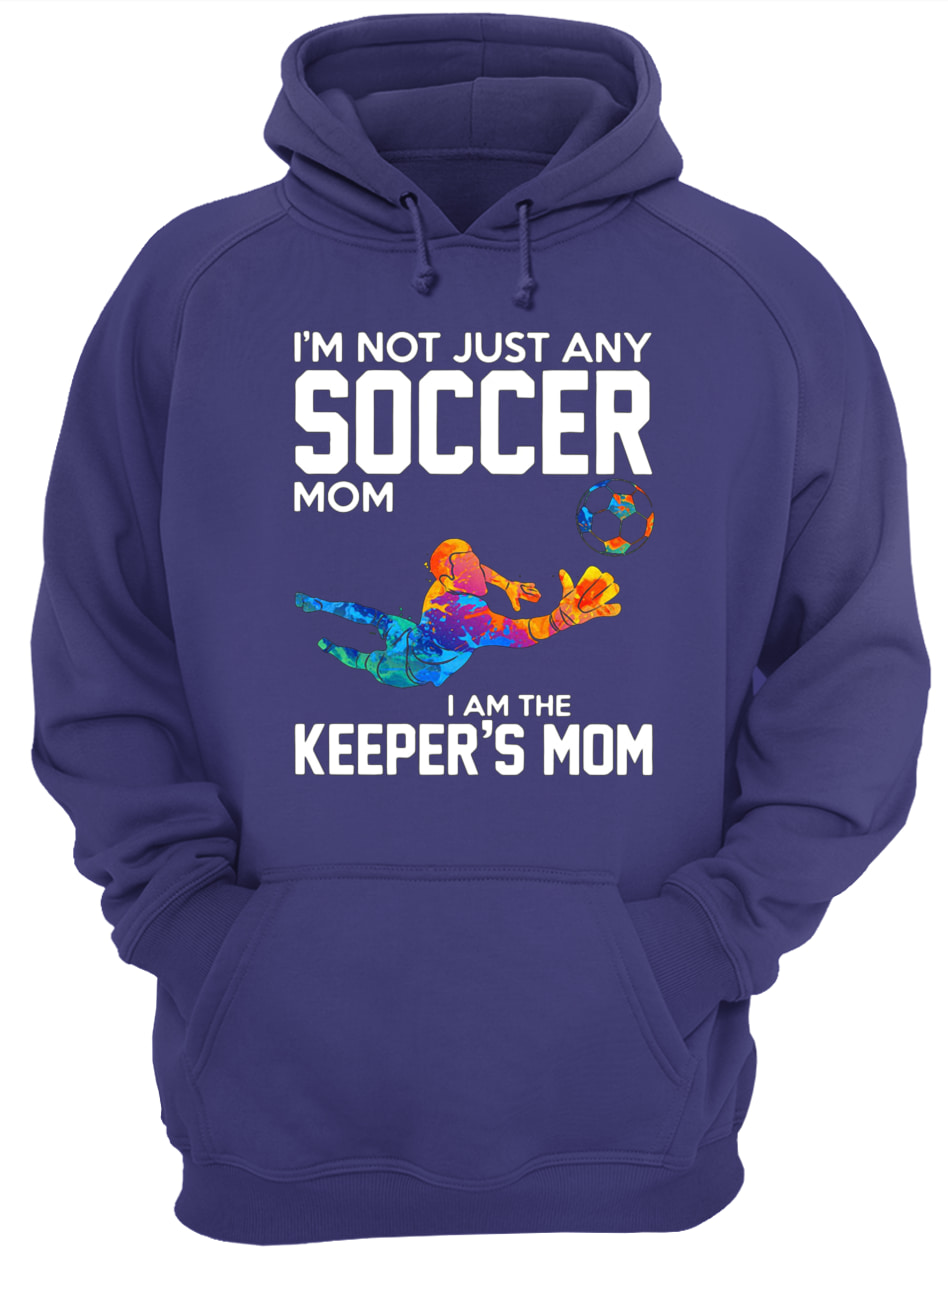 I’m not just any soccer mom I am the keeper’s mom hoodie